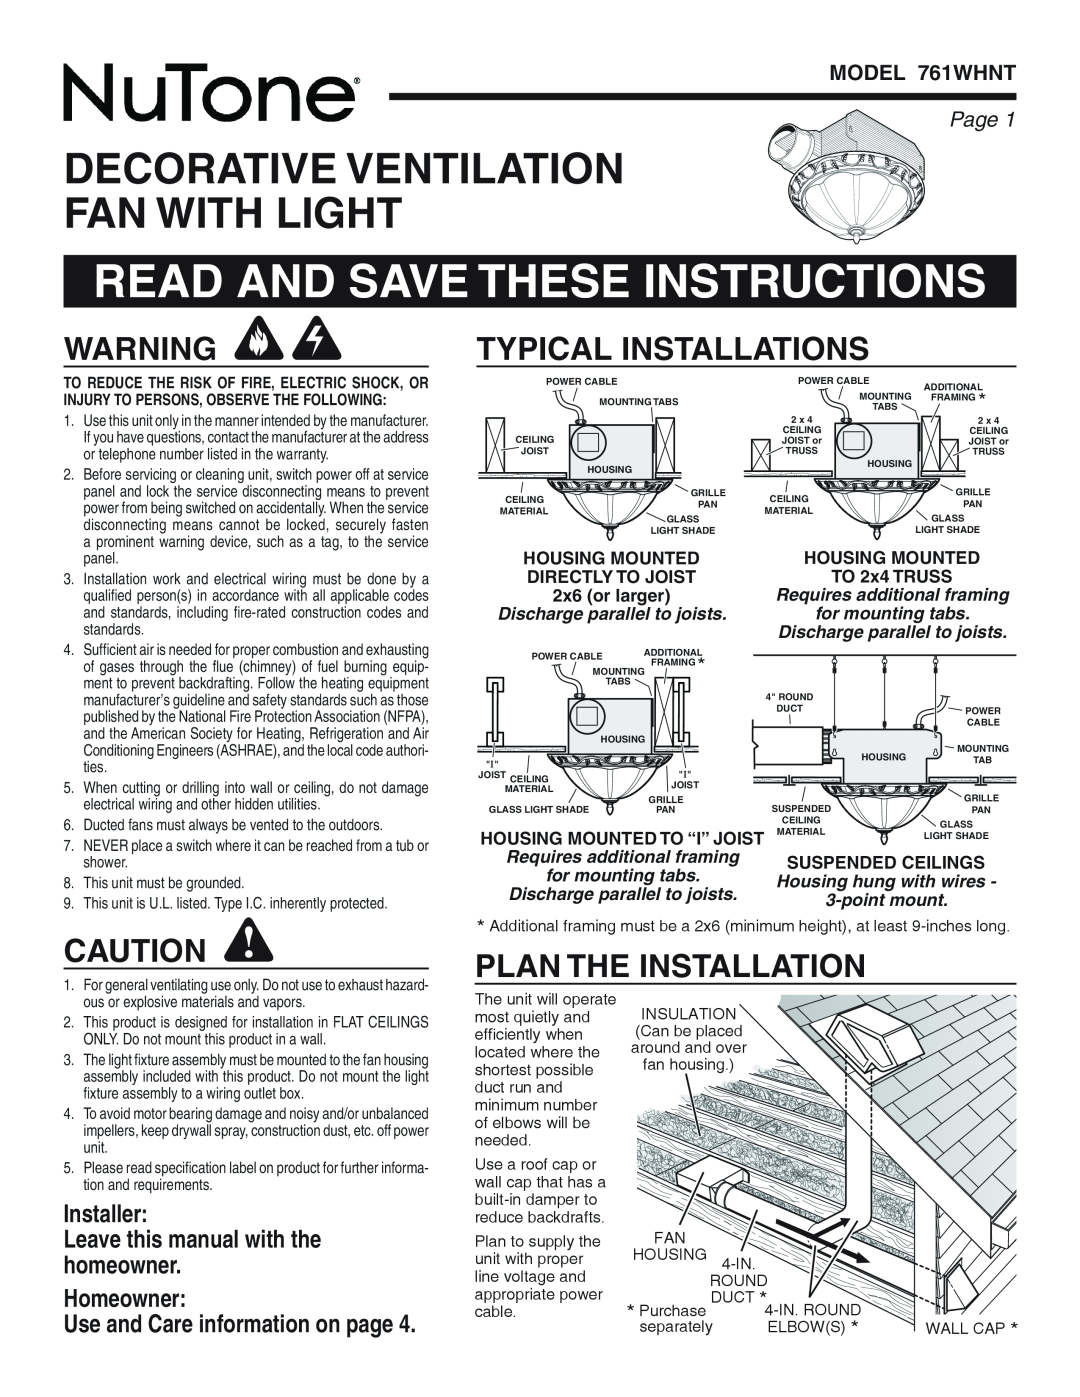 NuTone warranty DECORATIVE ventilation fan with light, Typical Installations, Plan The Installation, MODEL 761WHNT 